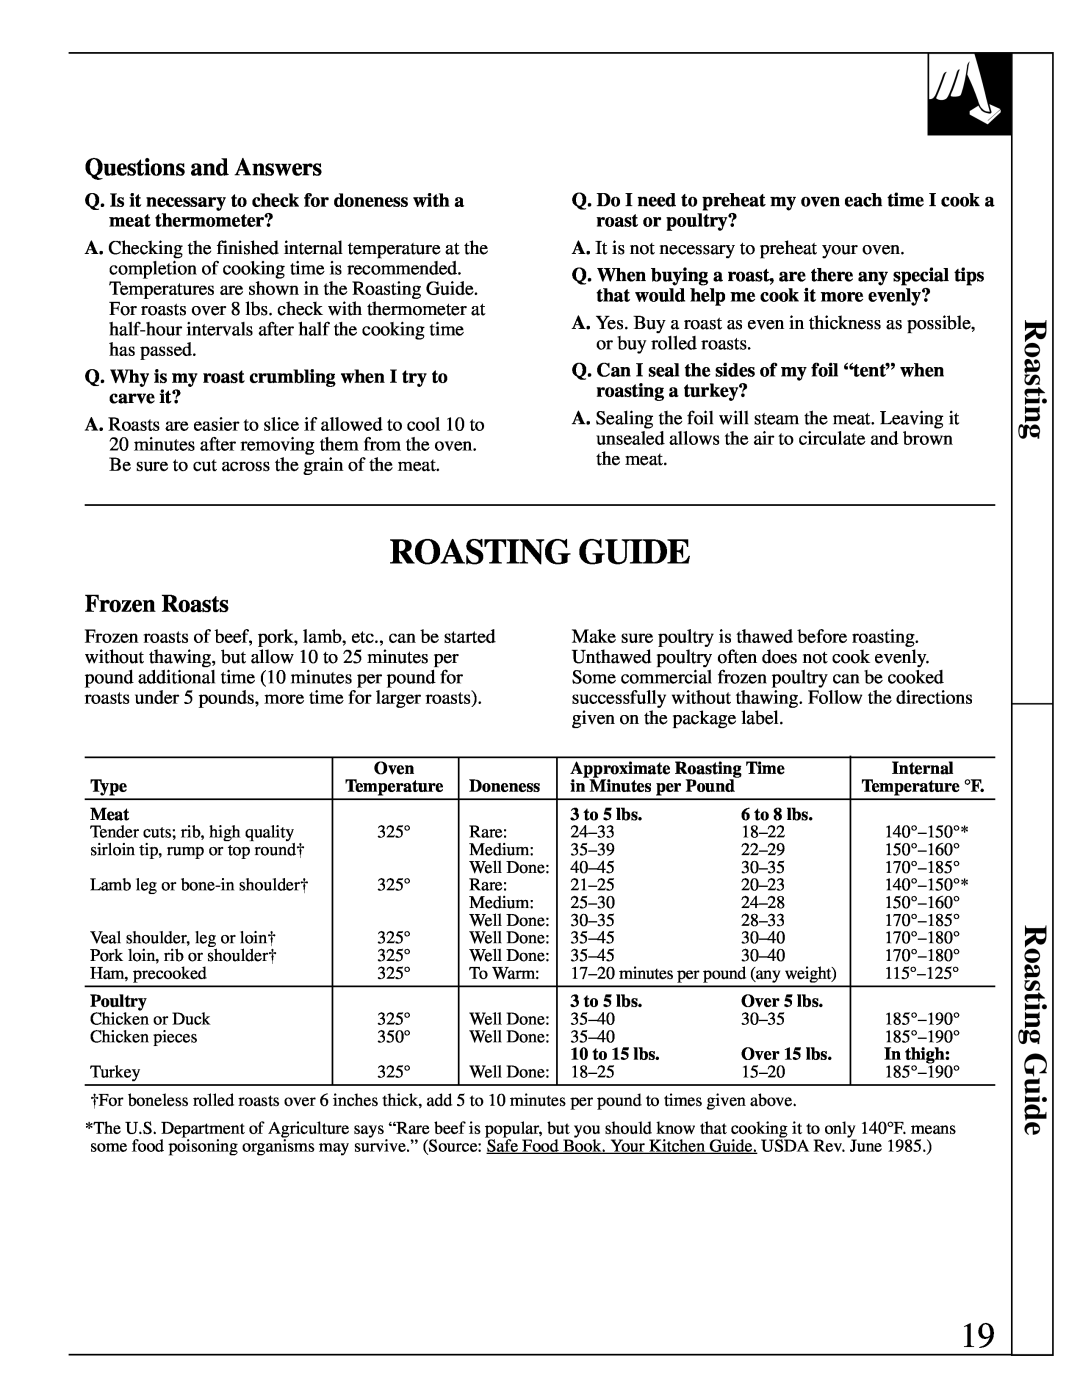 GE JGRS14 Roasting Guide, Questions and Answers, Frozen Roasts, Q. Why is my roast crumbling when I try to carve it? 